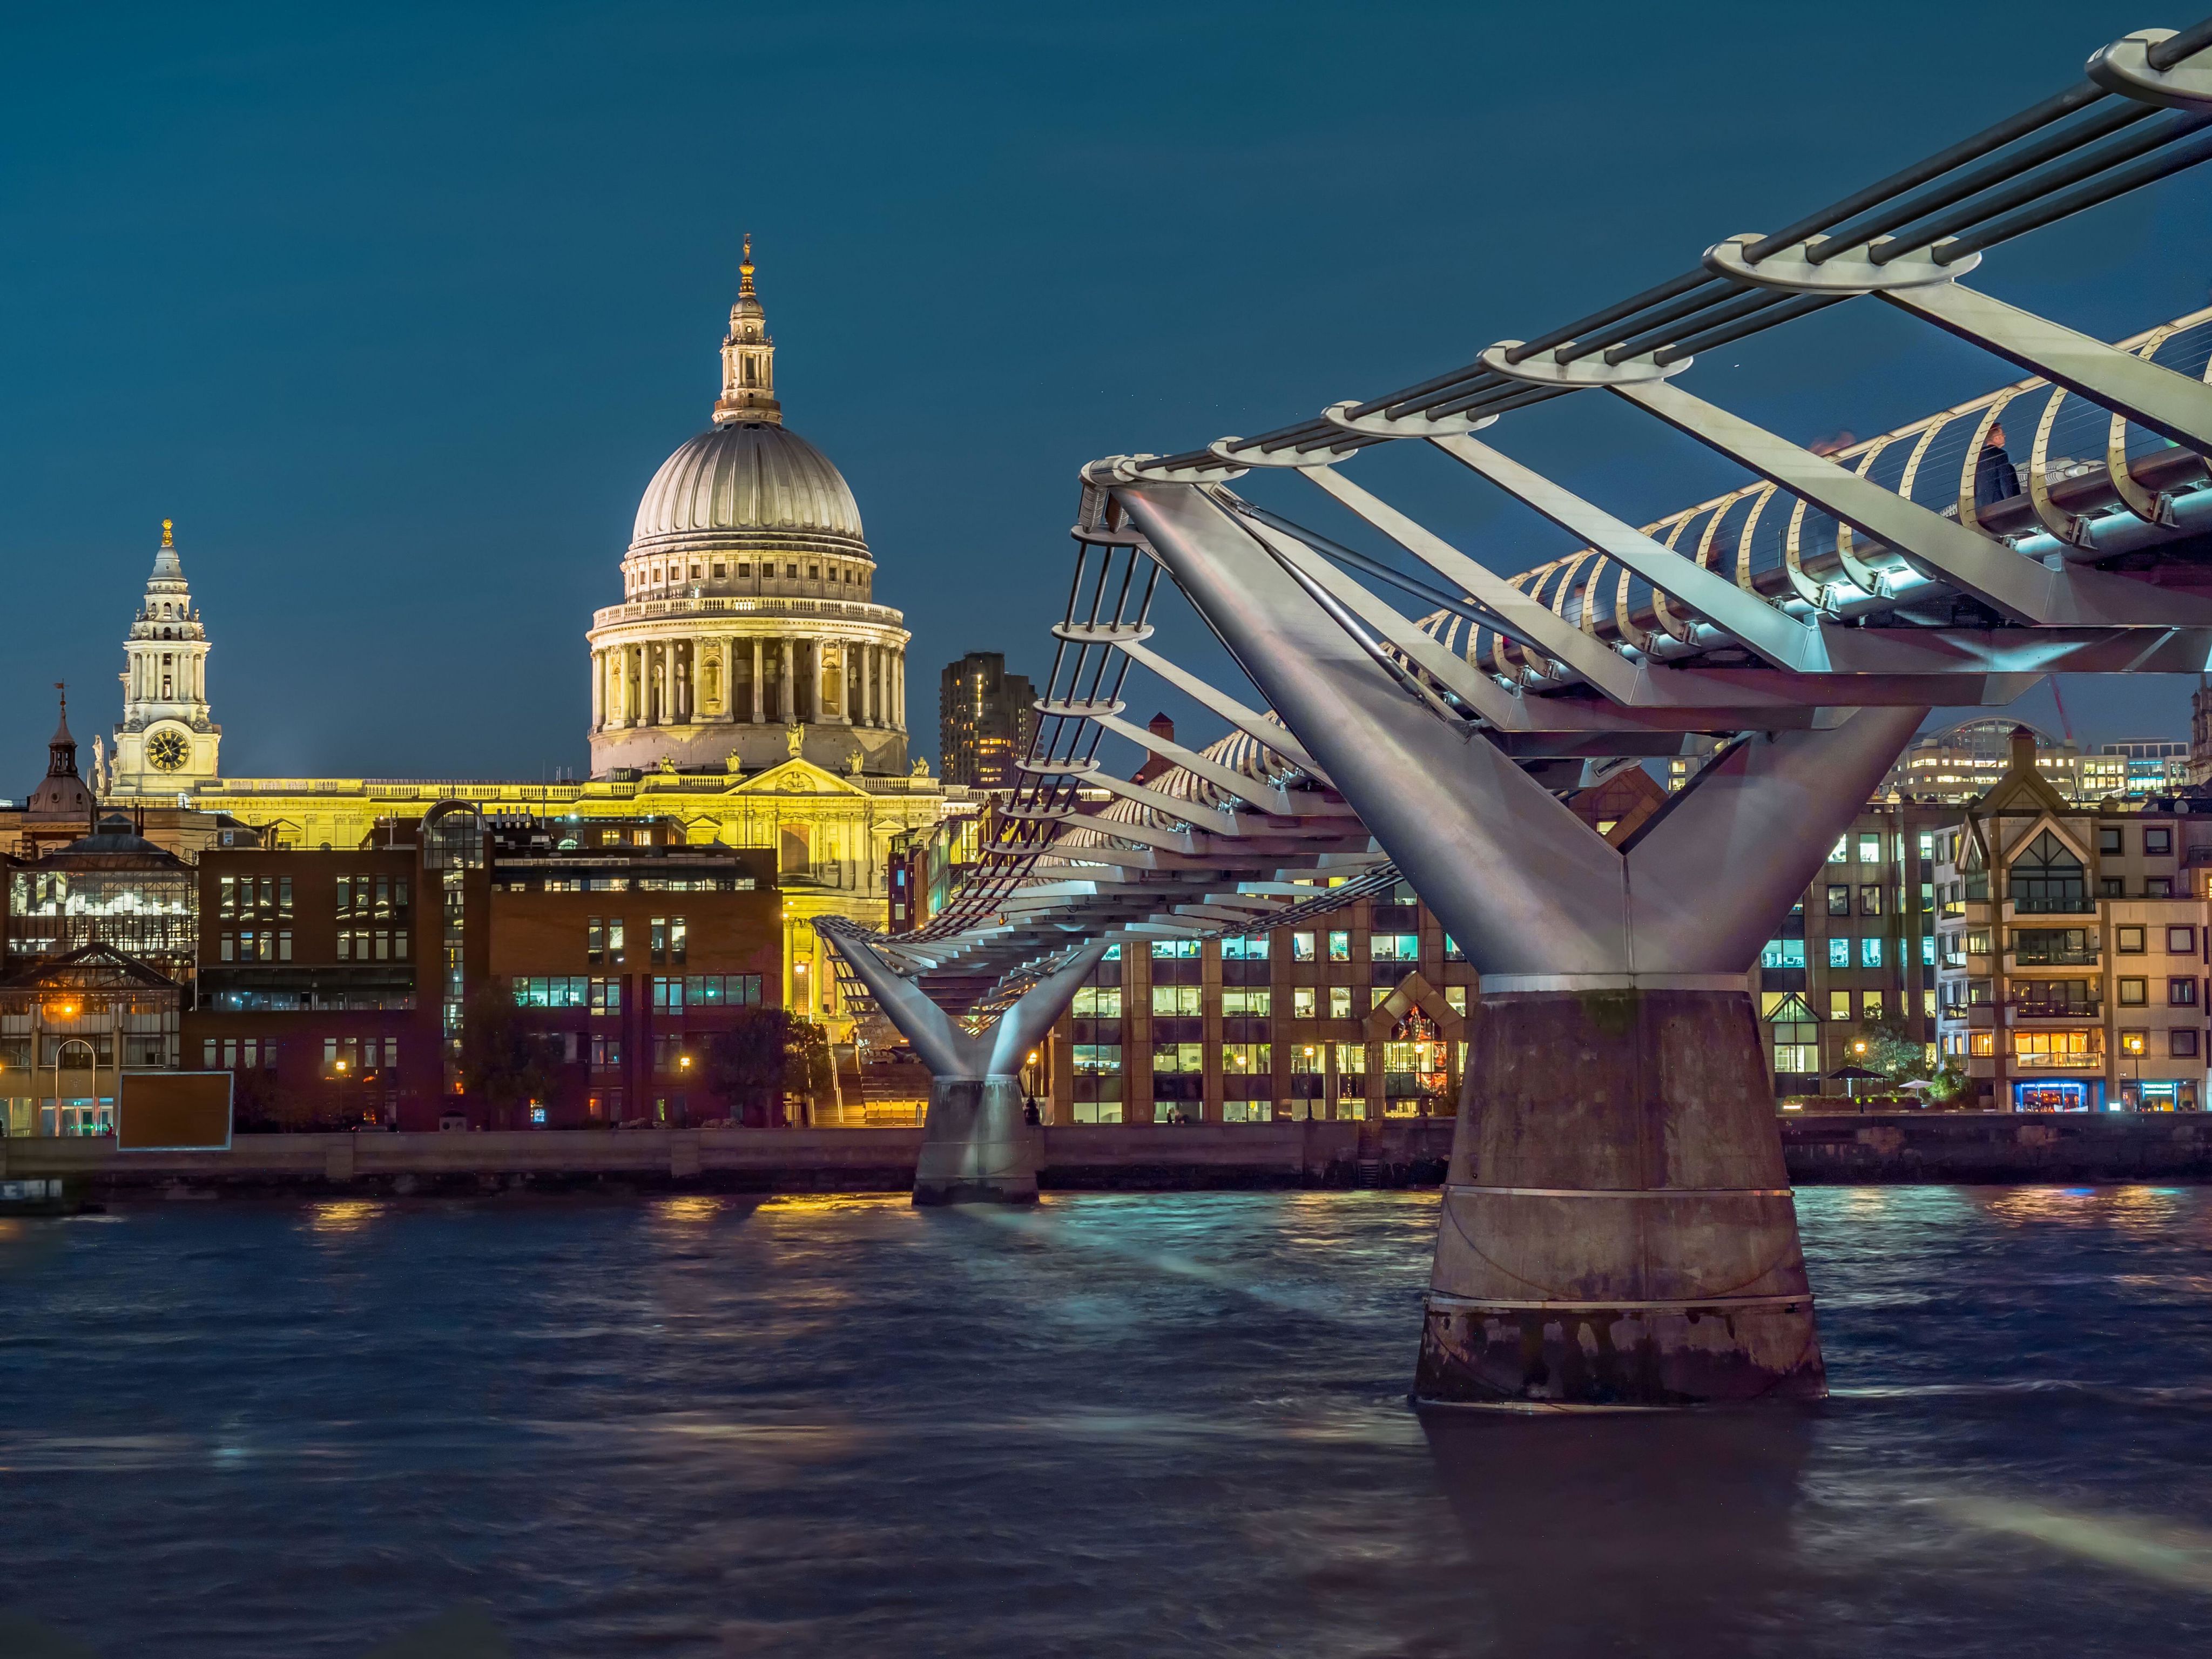 St Paul's Cathedral and the Millennium Bridge, London at night